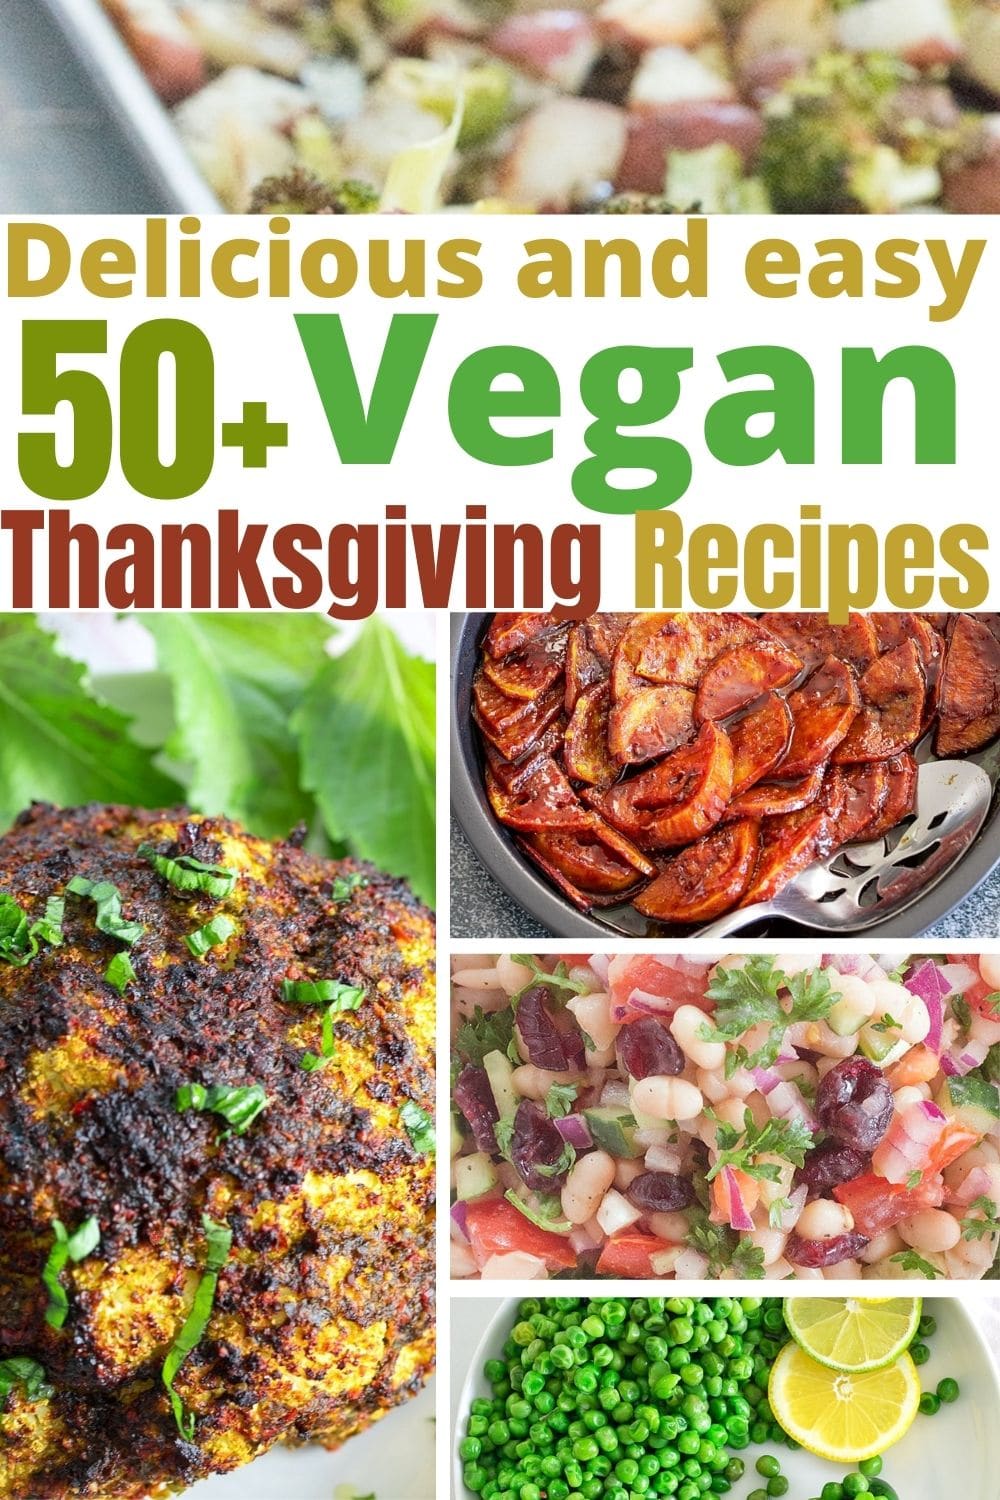 a collage of 5 images with the words "Delicious and easy 50+ vegan Thanksgiving recipes" written on it